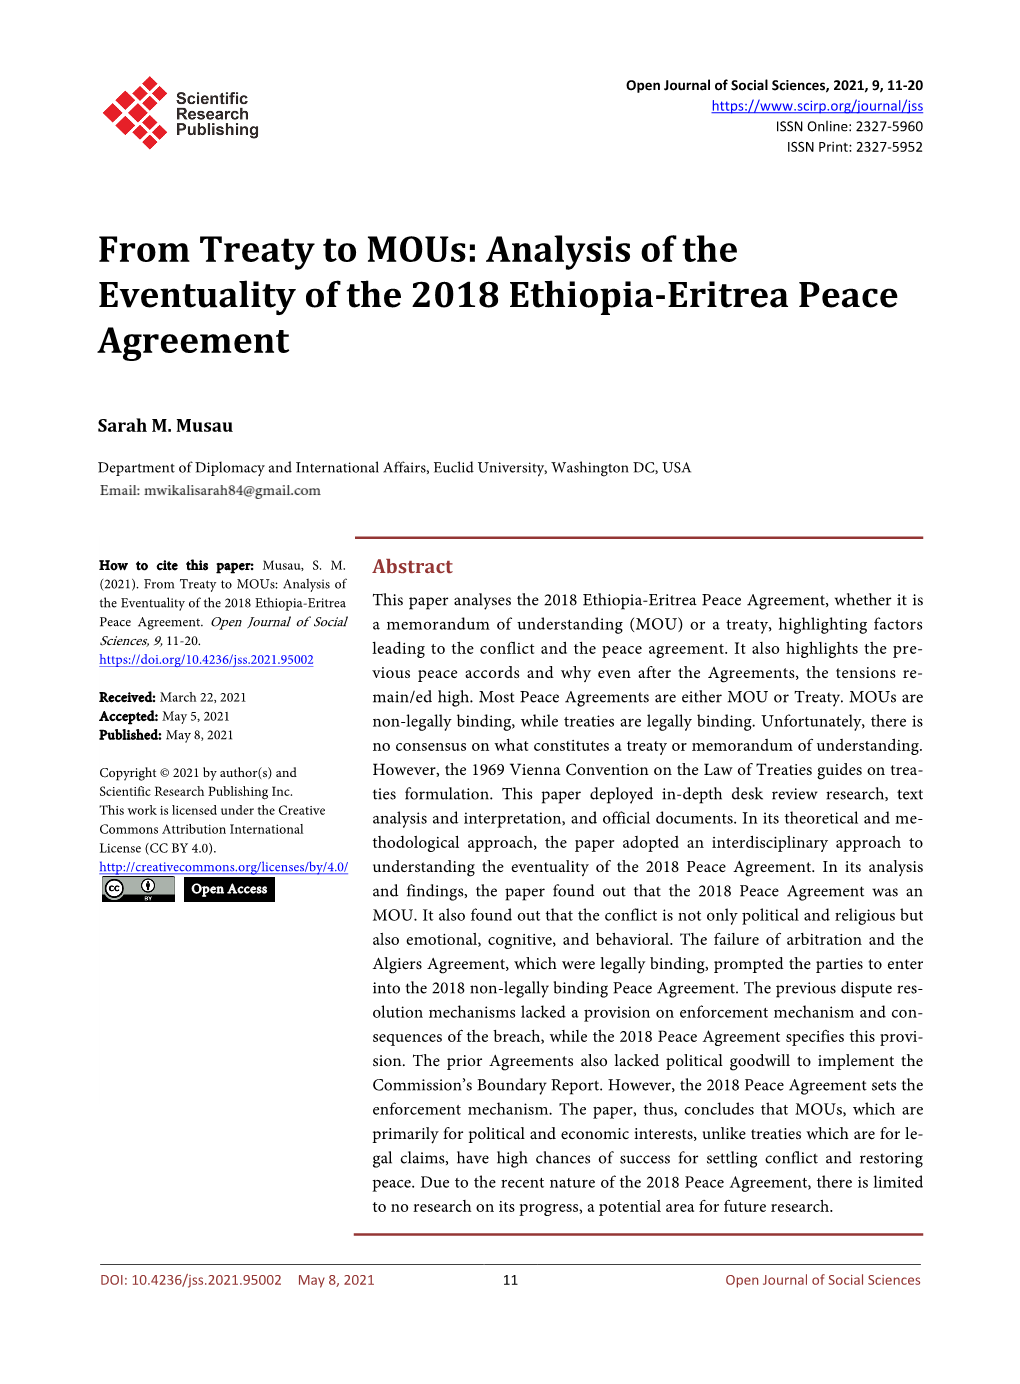 Analysis of the Eventuality of the 2018 Ethiopia-Eritrea Peace Agreement